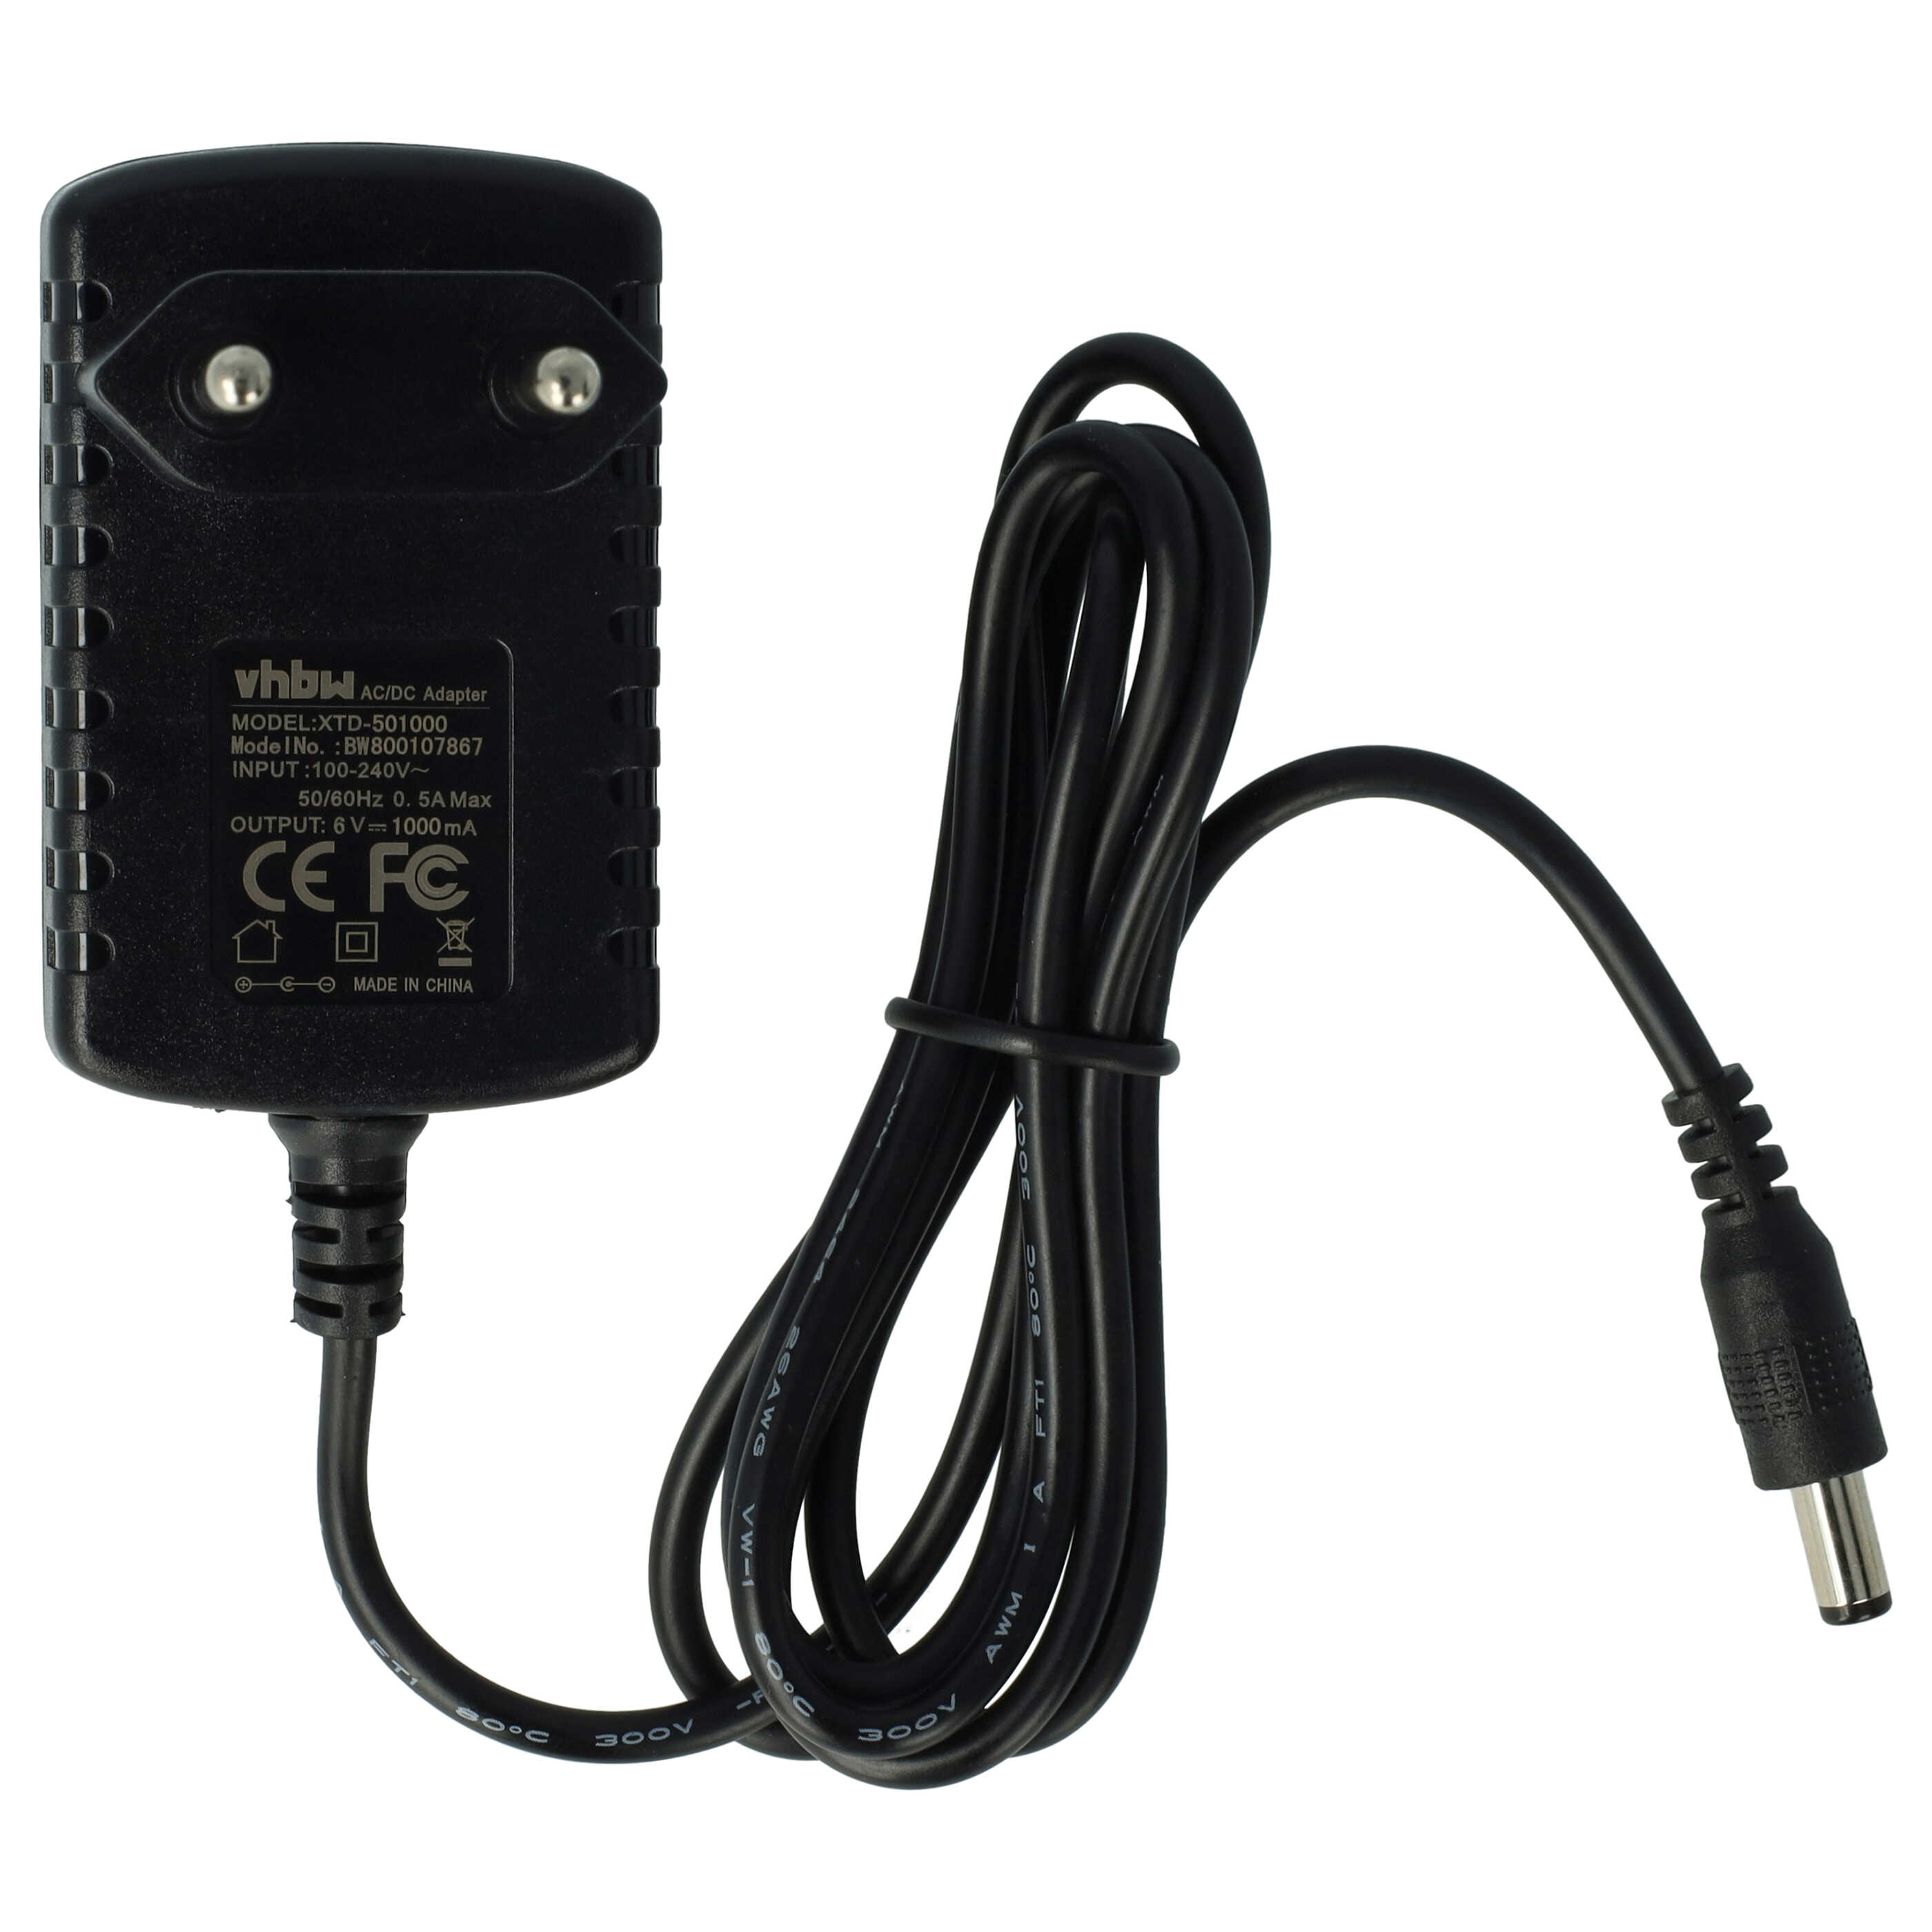 Power Adapter replaces Uebe type A, SW06-060E, PZN-03558547 for UebeBlood Pressure Monitor - 110 cm